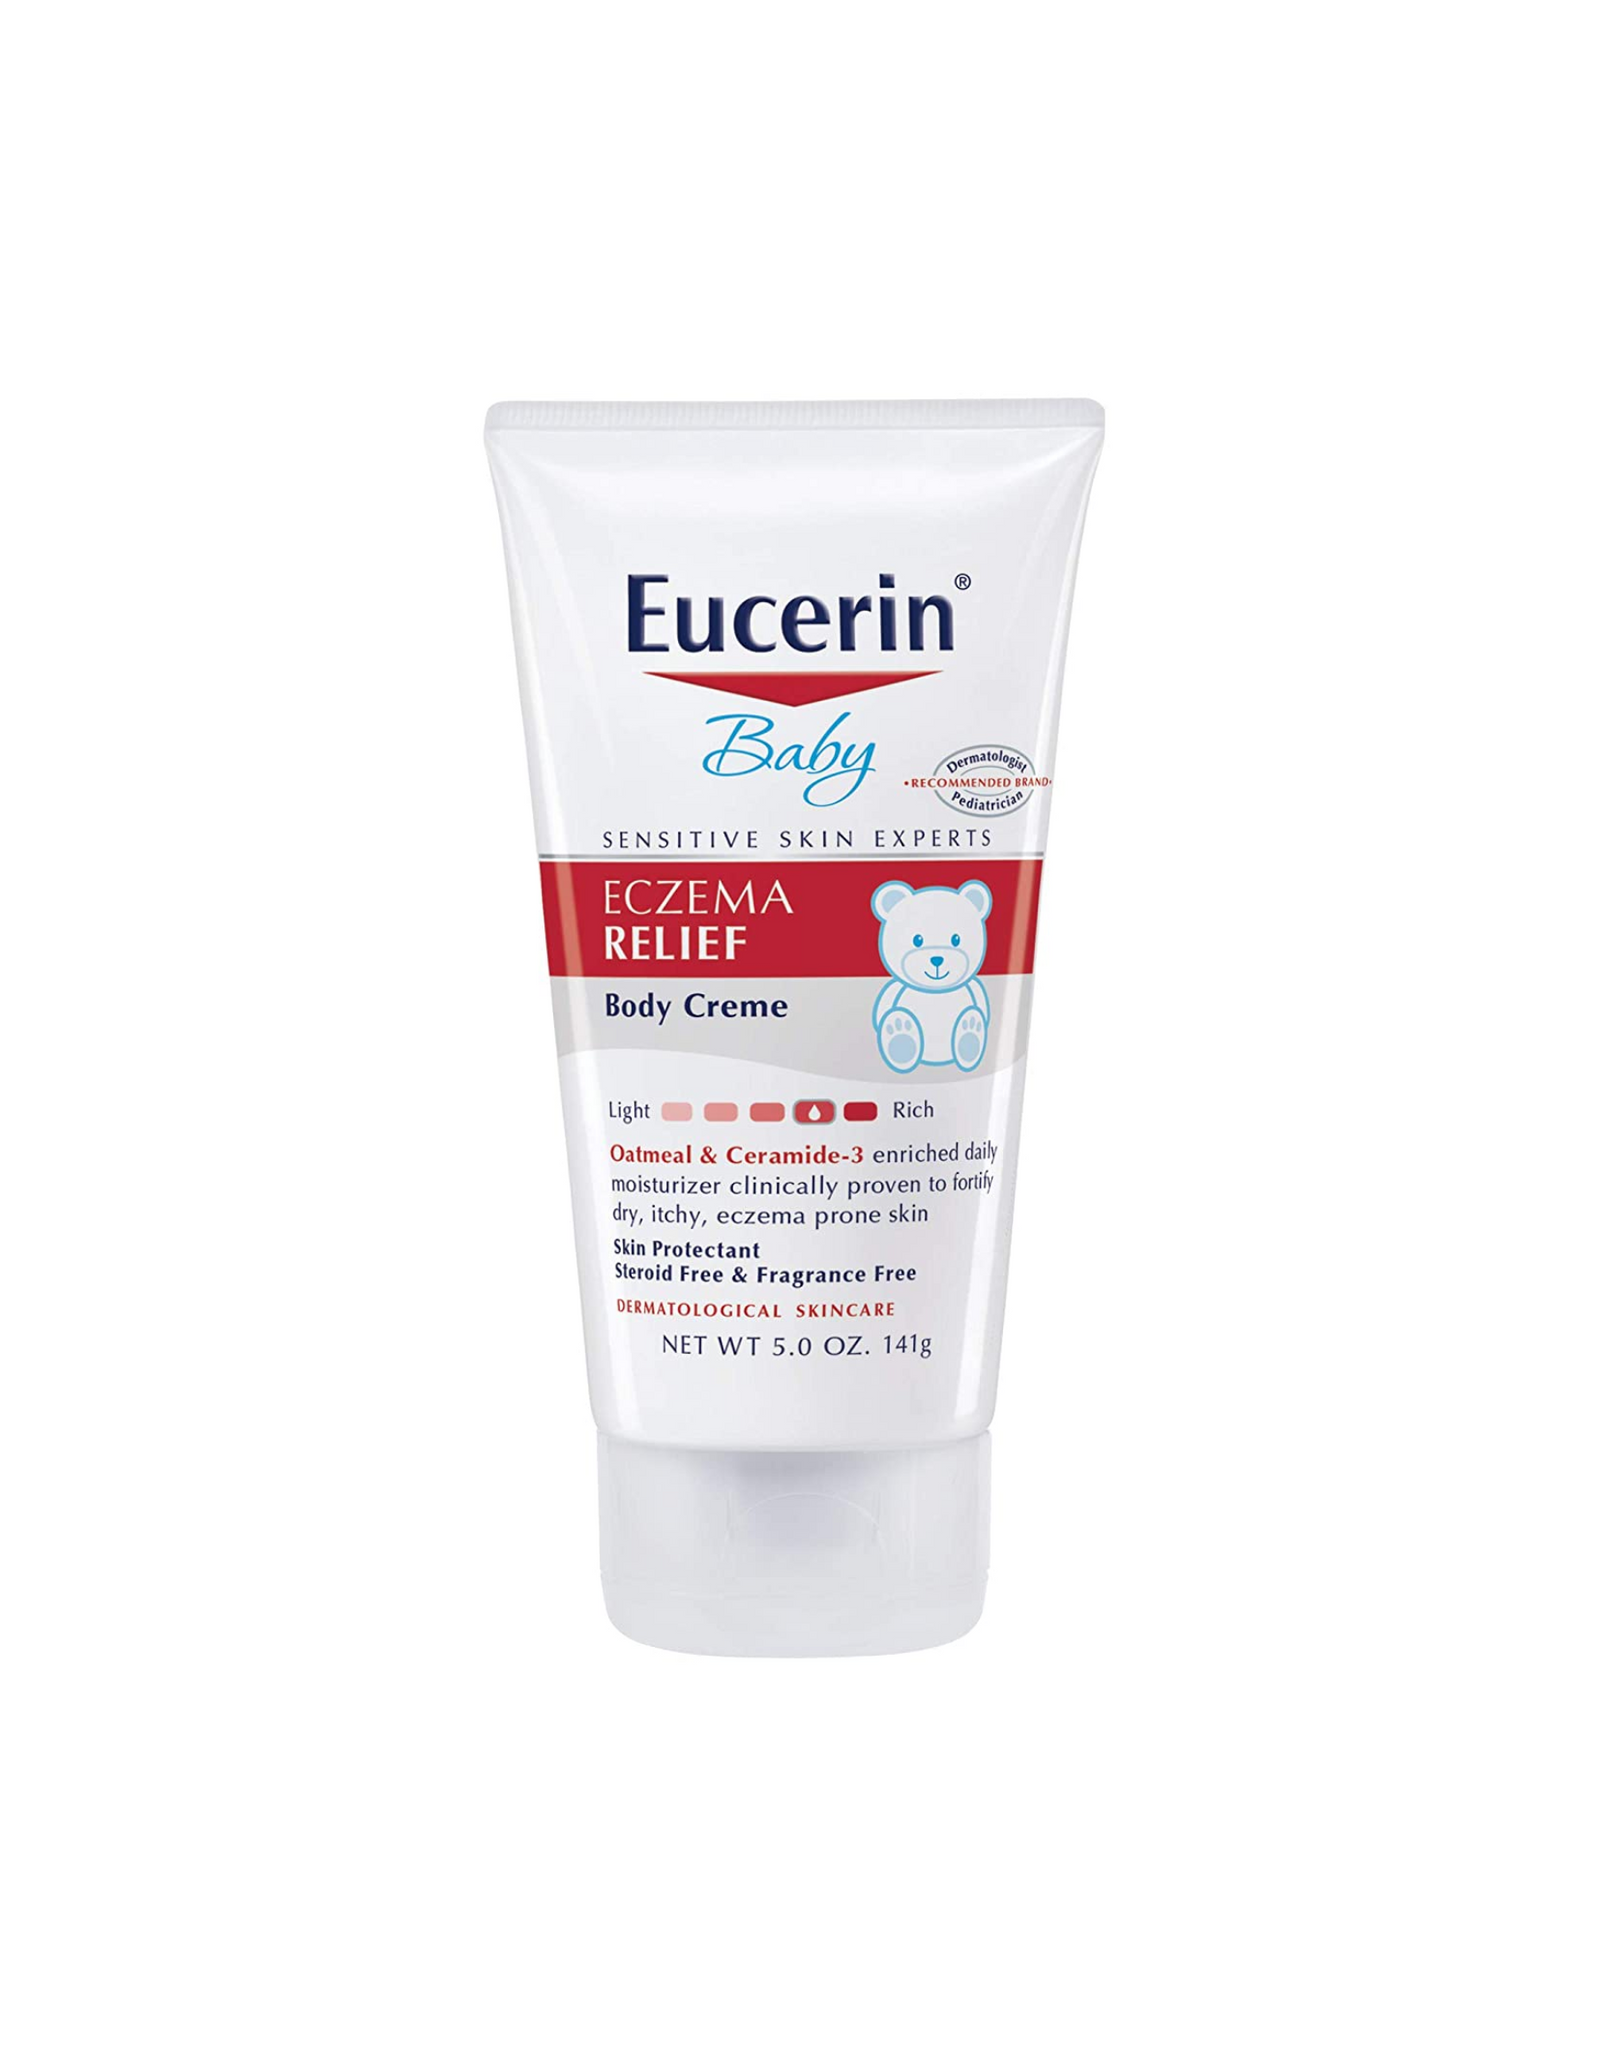 Eucerin Baby Eczema Relief Body Cream, with Oatmeal and Ceramide-3, for 3+ Months of Age - 5 oz